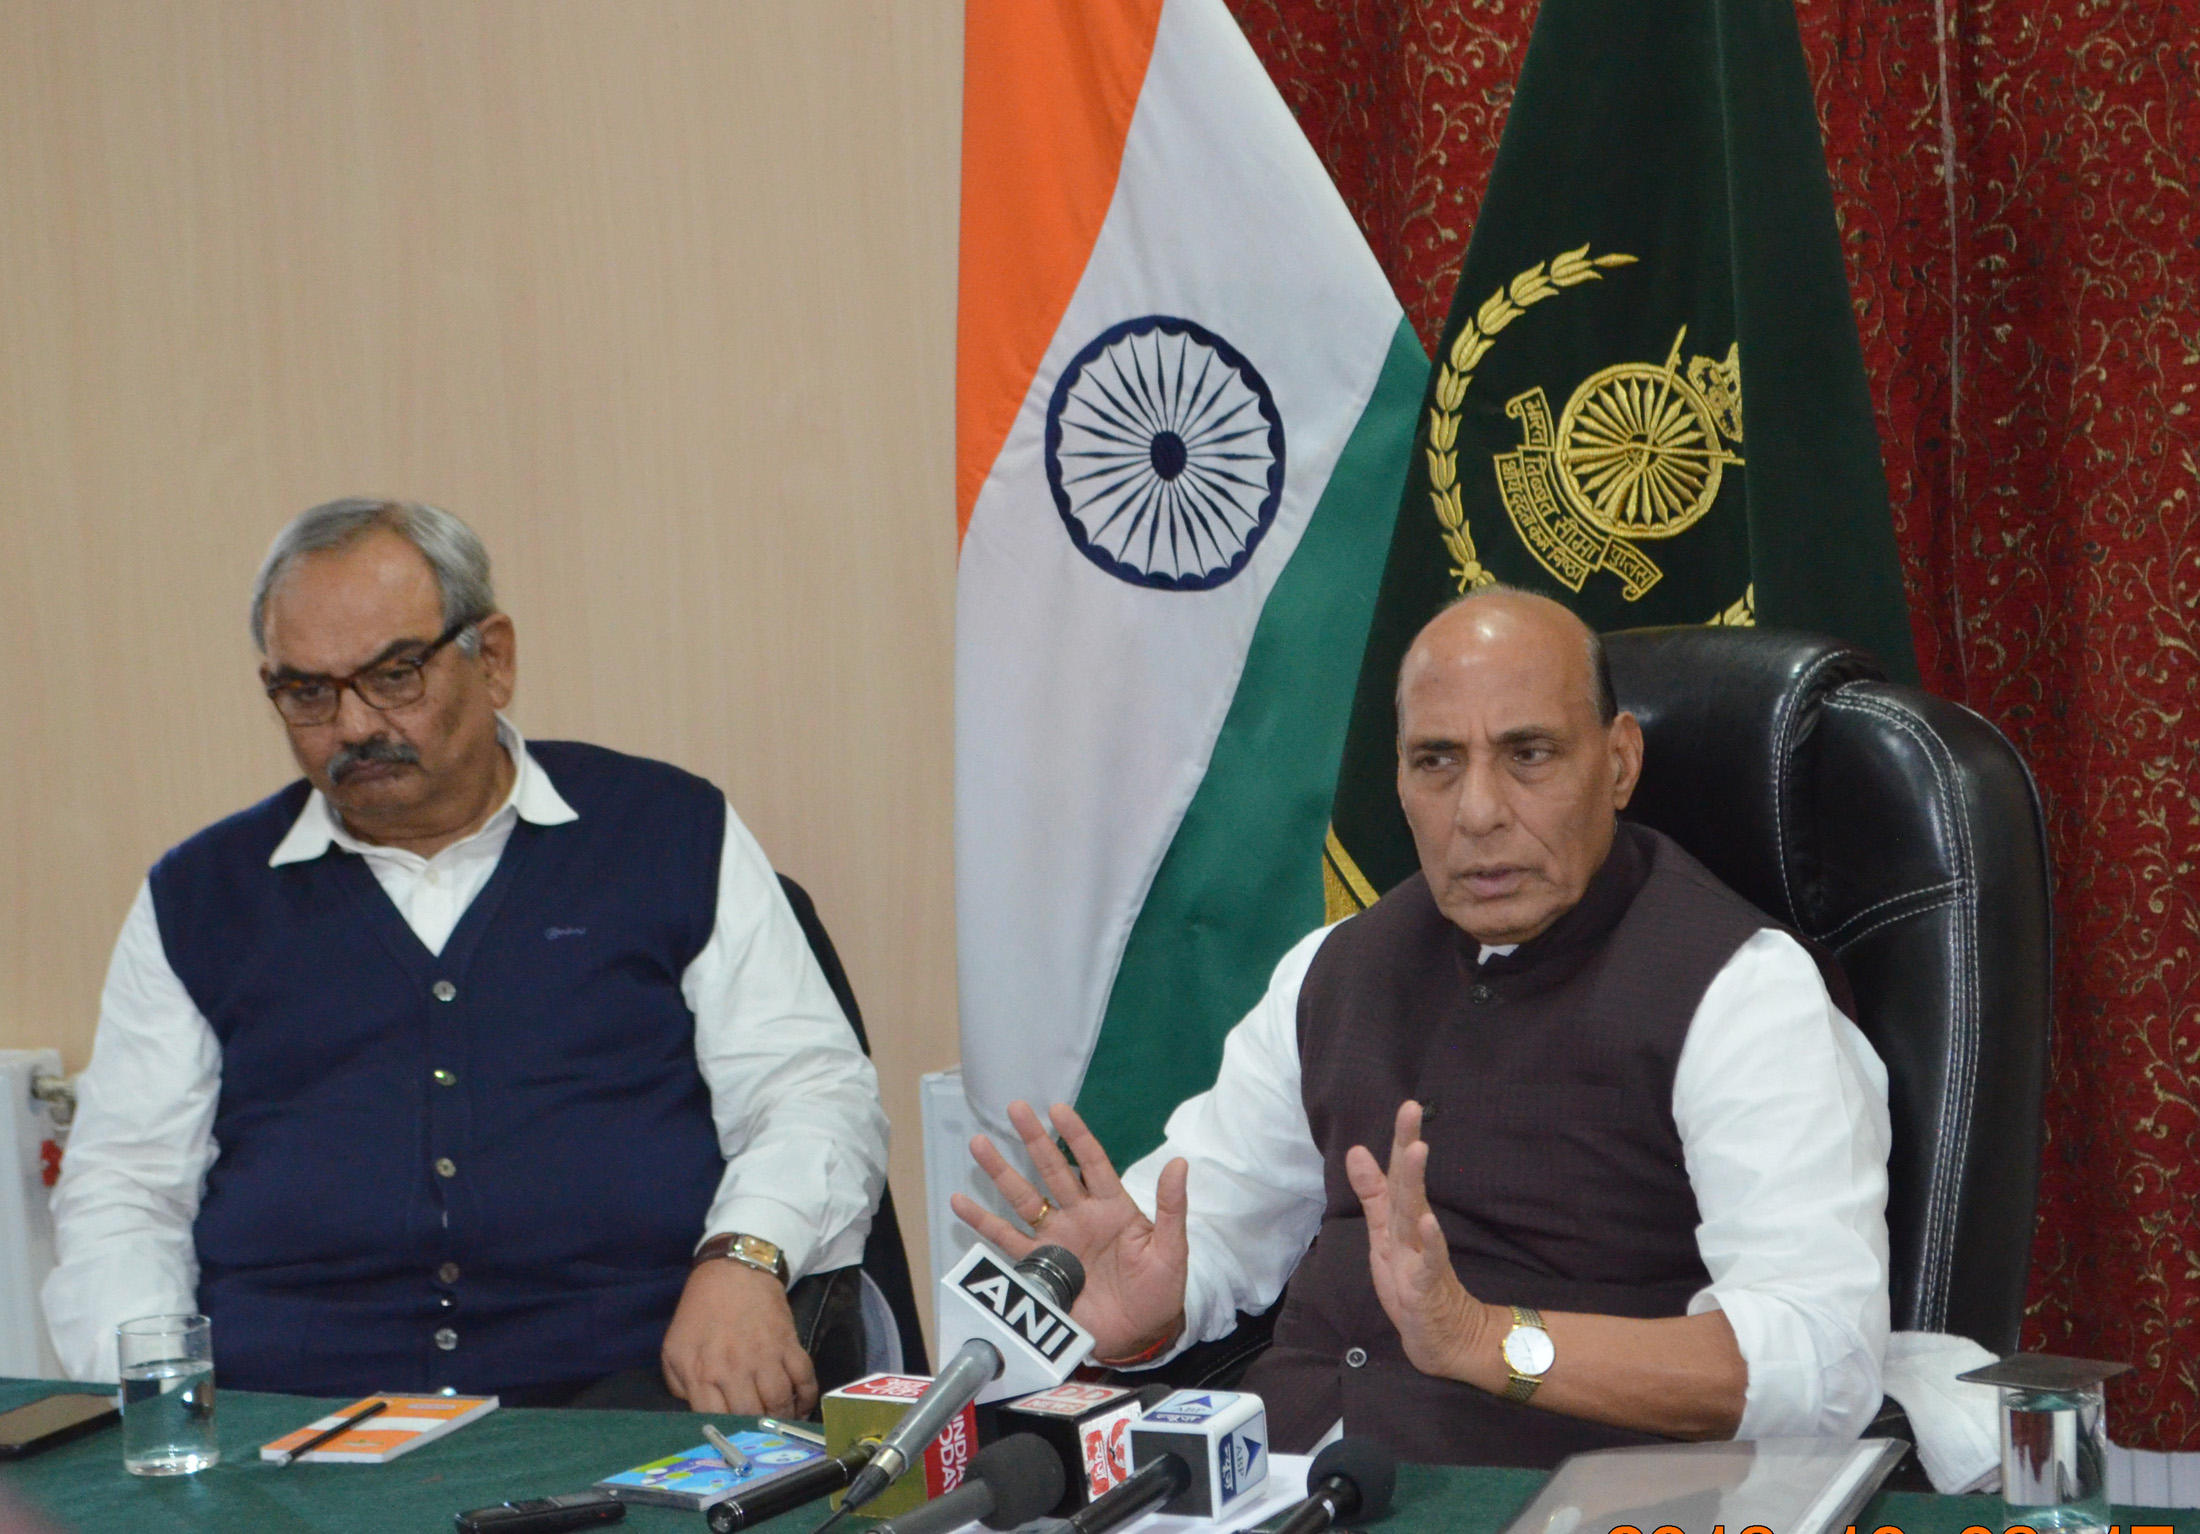 The Union Home Minister, Shri Rajnath Singh interacting with the different delegations, in Leh, Jammu and Kashmir on October 03, 2016. 	The Home Secretary, Shri Rajiv Mehrishi is also seen.